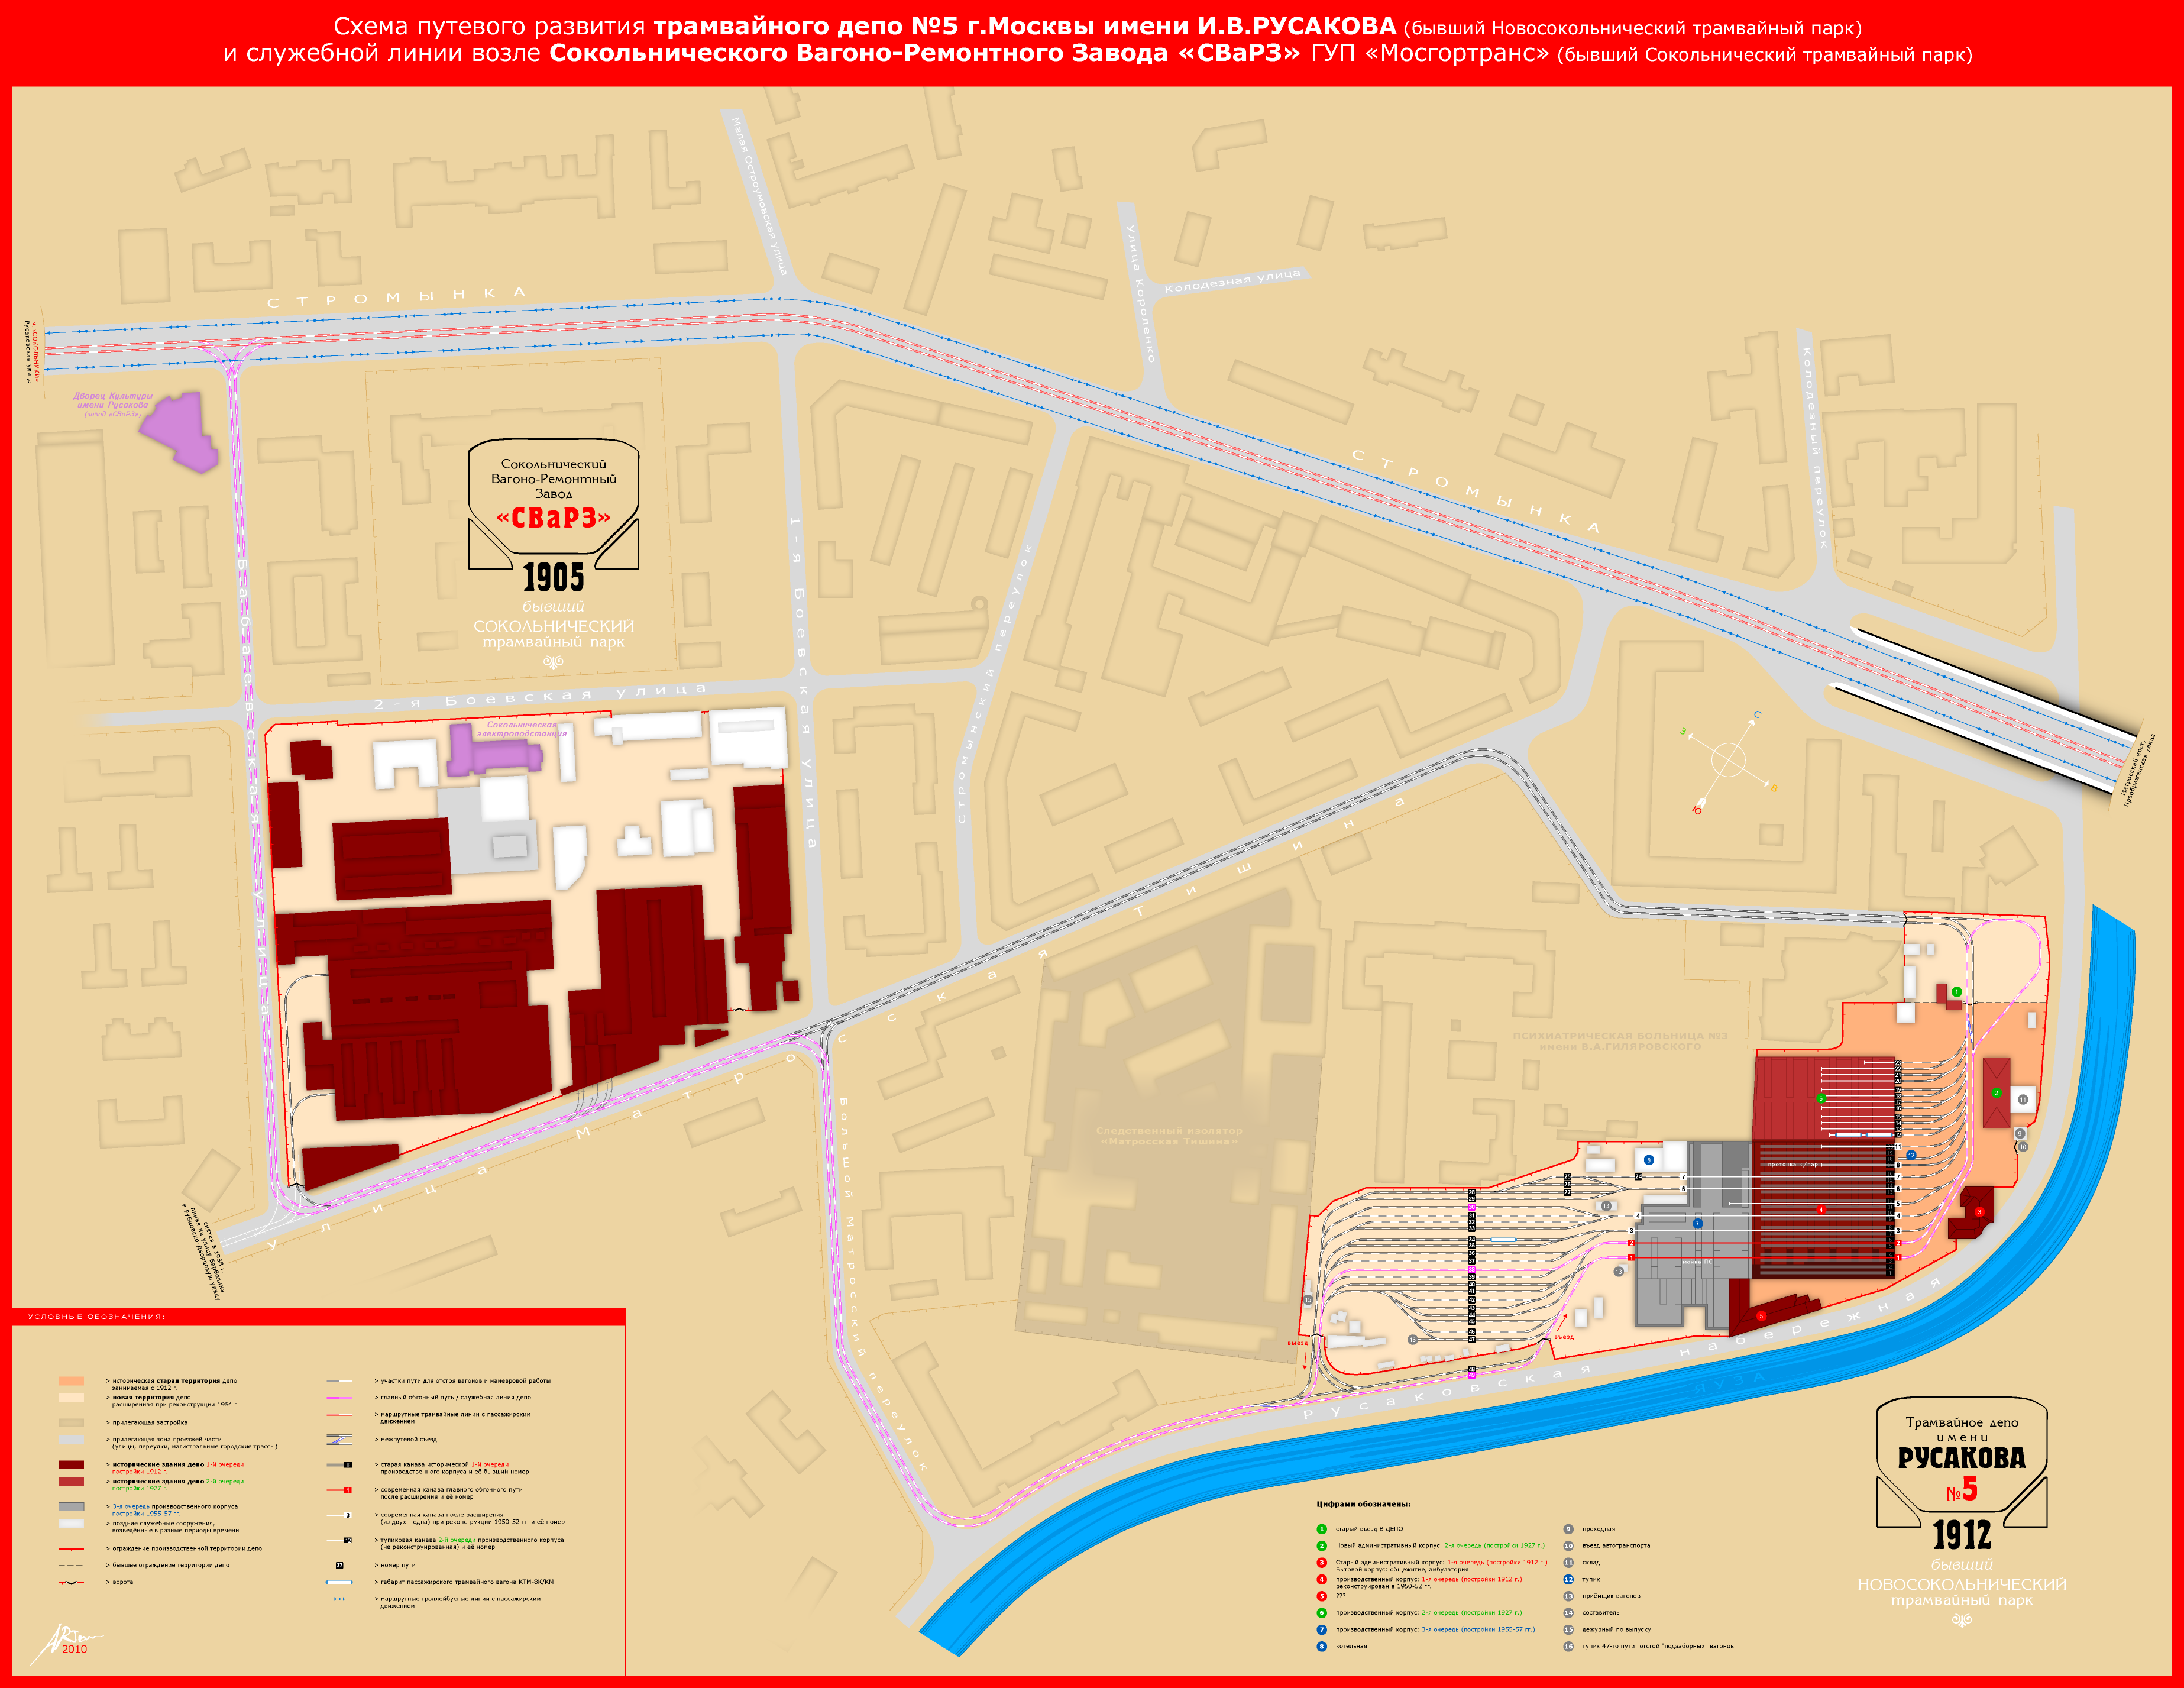 Moscow — SVARZ plant; Moscow — Tram depots: [5] Rusakova; Moscow — Tramway and Trolleybus Infrastructure Maps